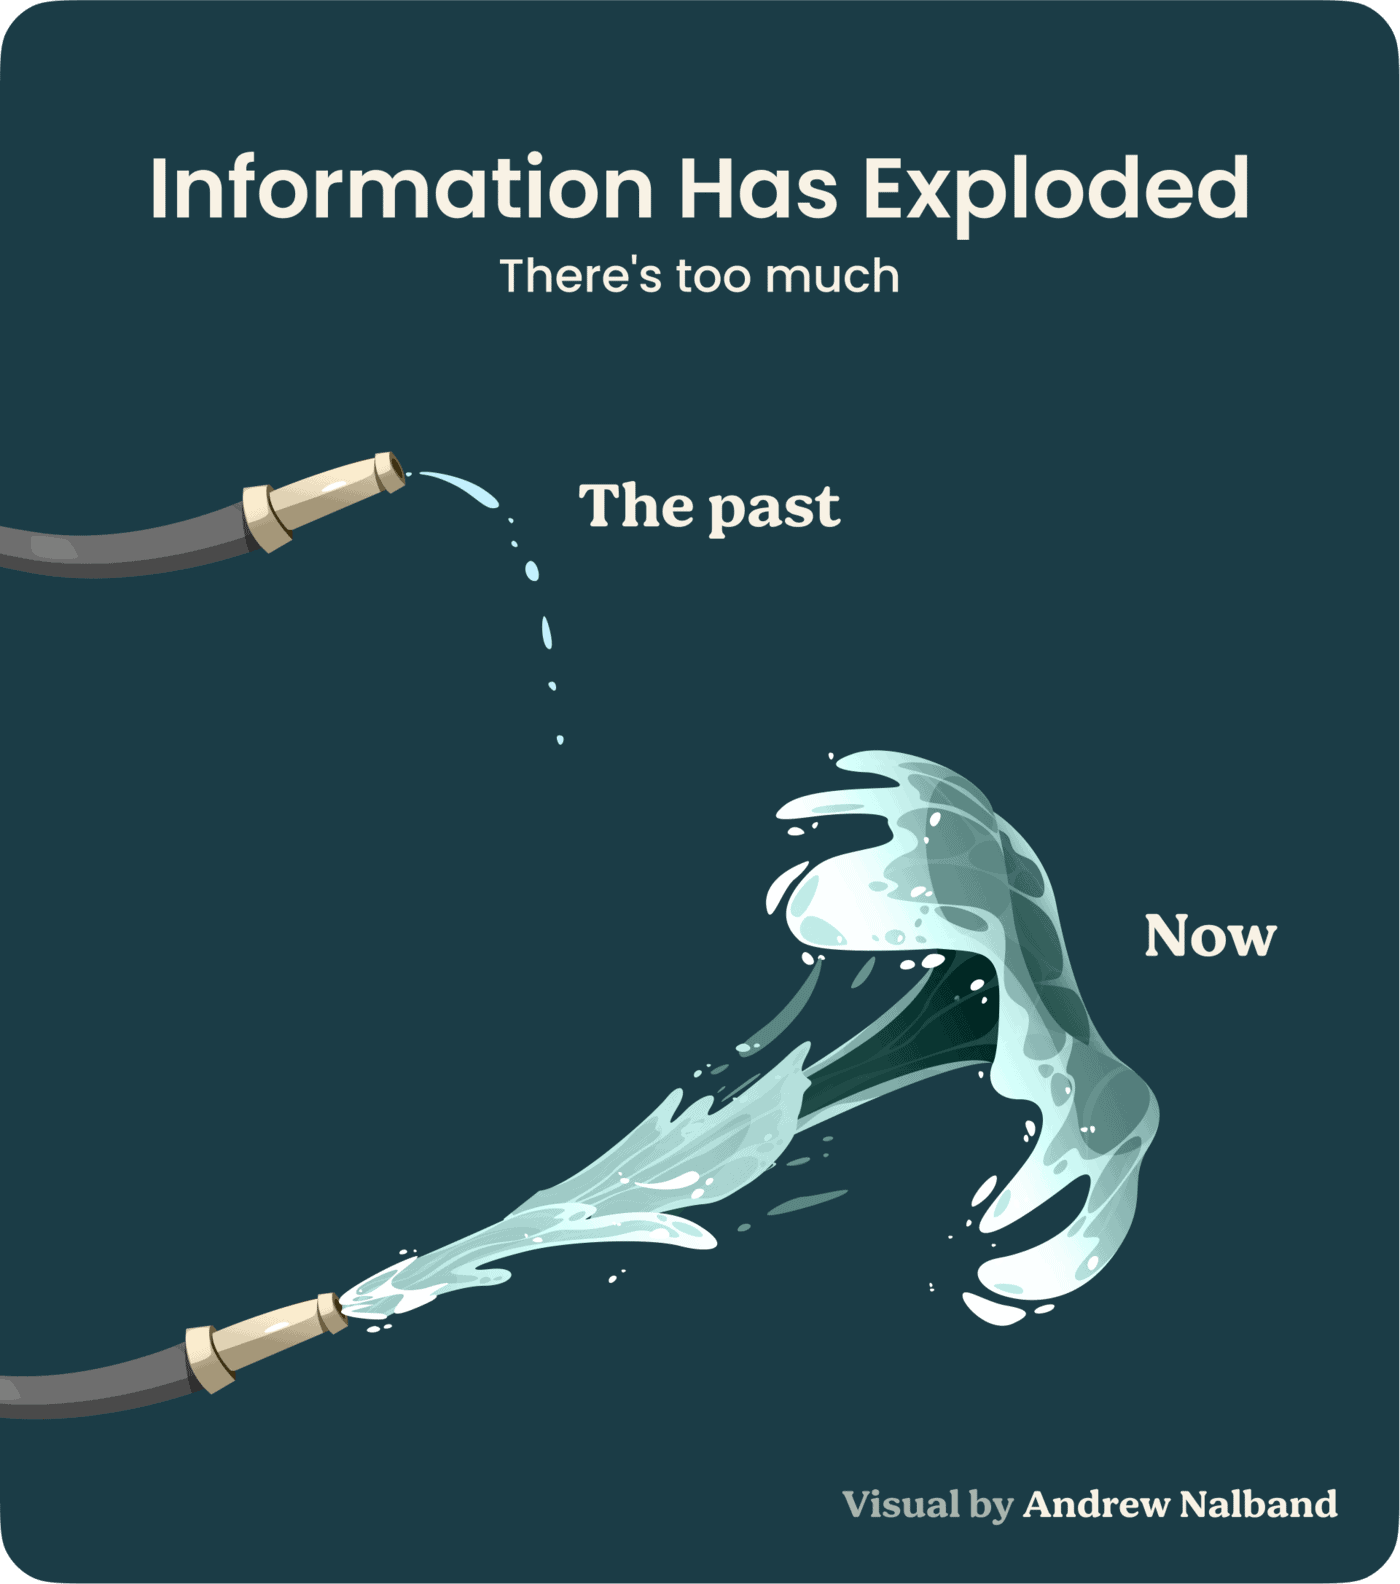 Information has exploded